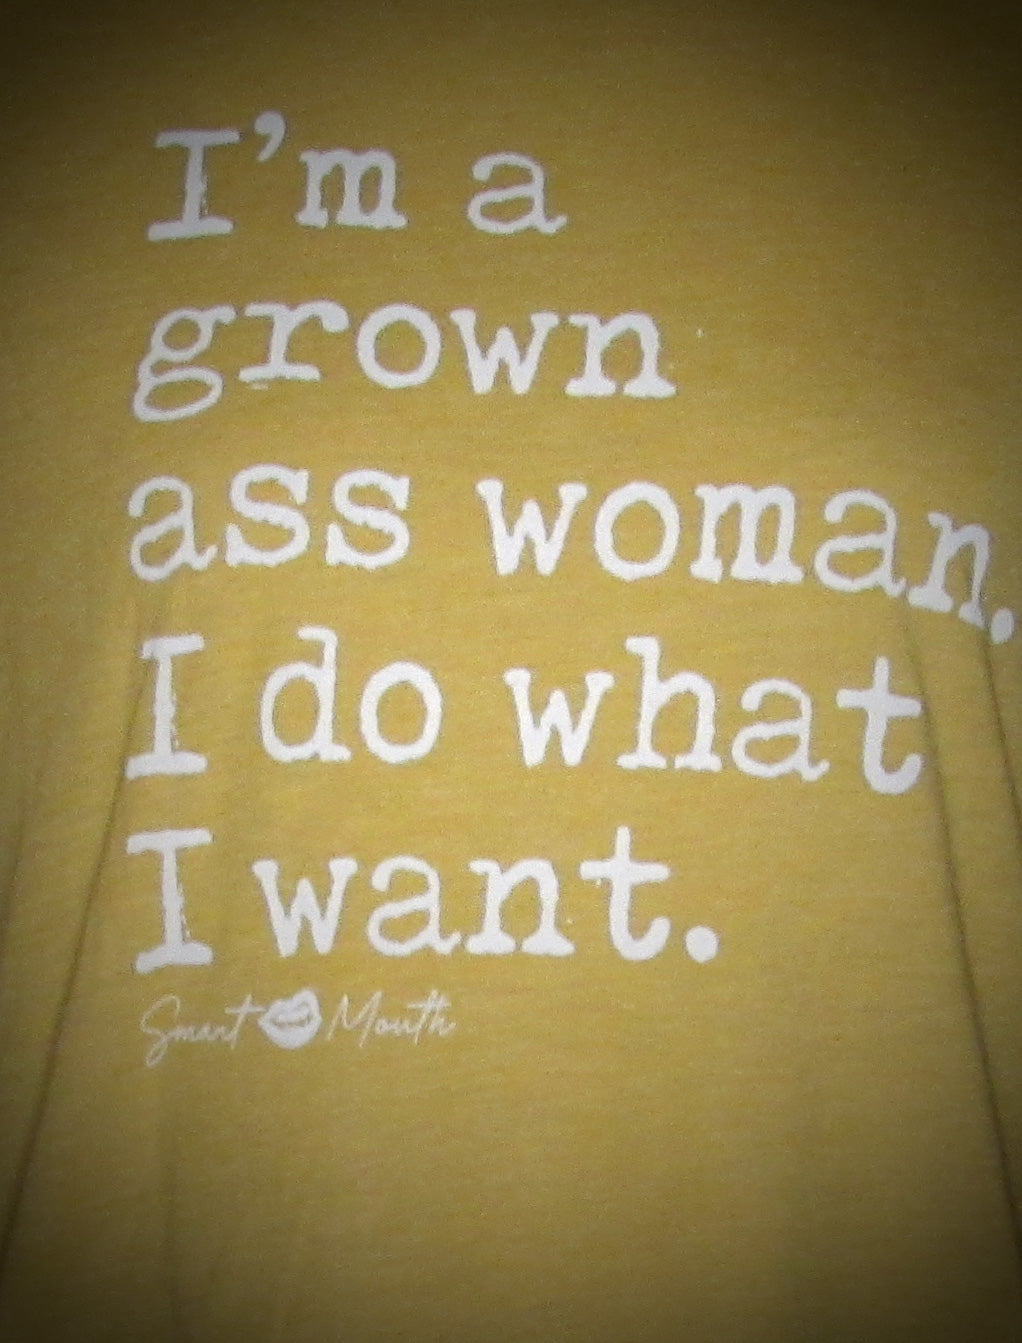 *Grown A$$ Woman Graphic Tee